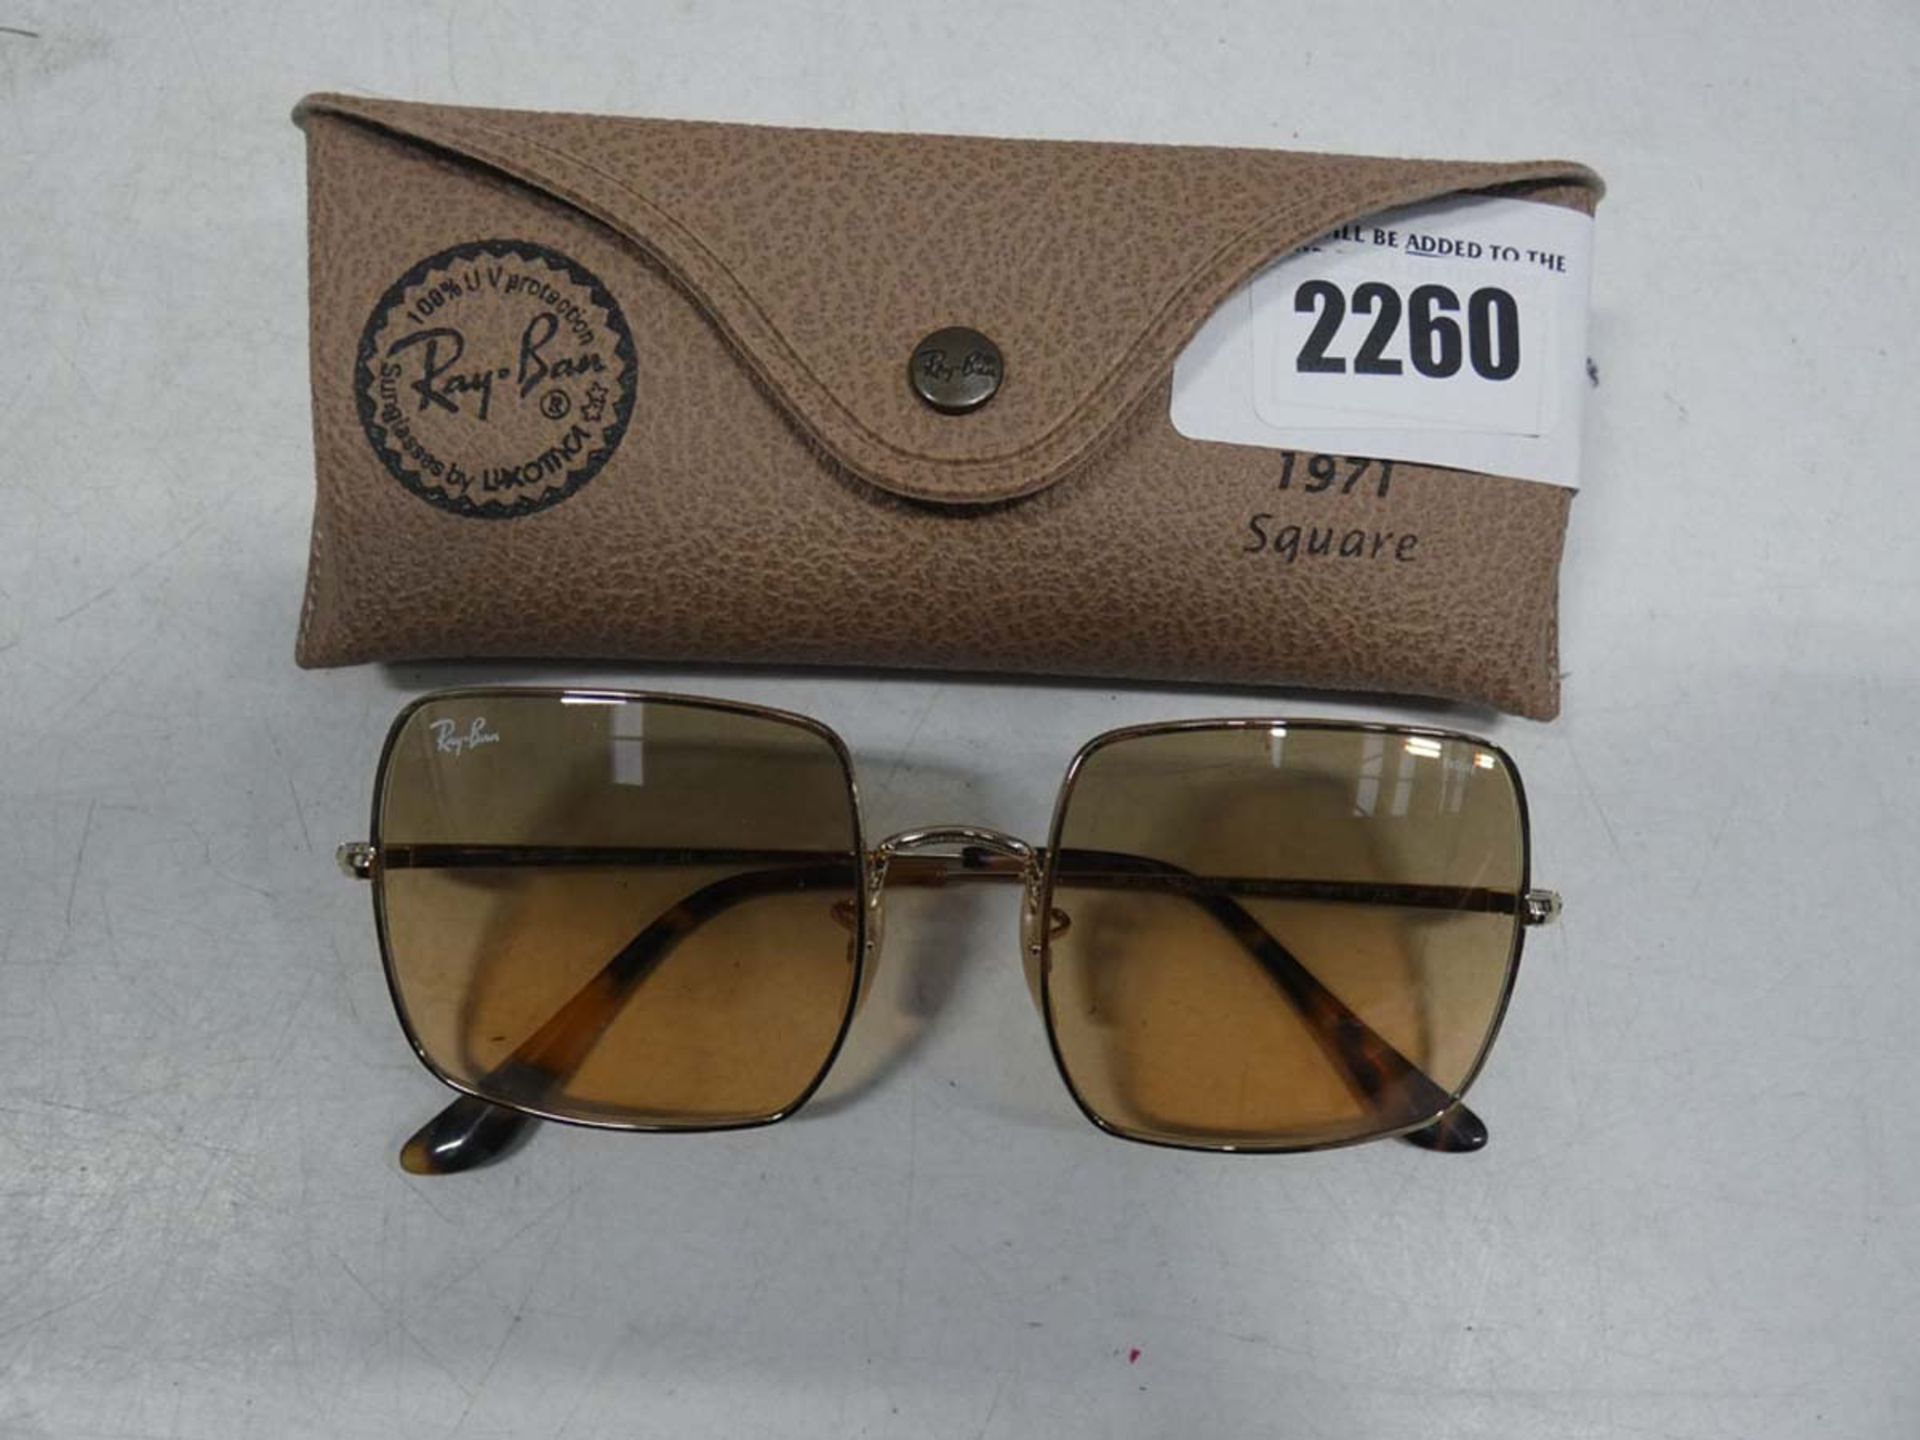 Ray-Ban RB1971 Square sunglasses with case